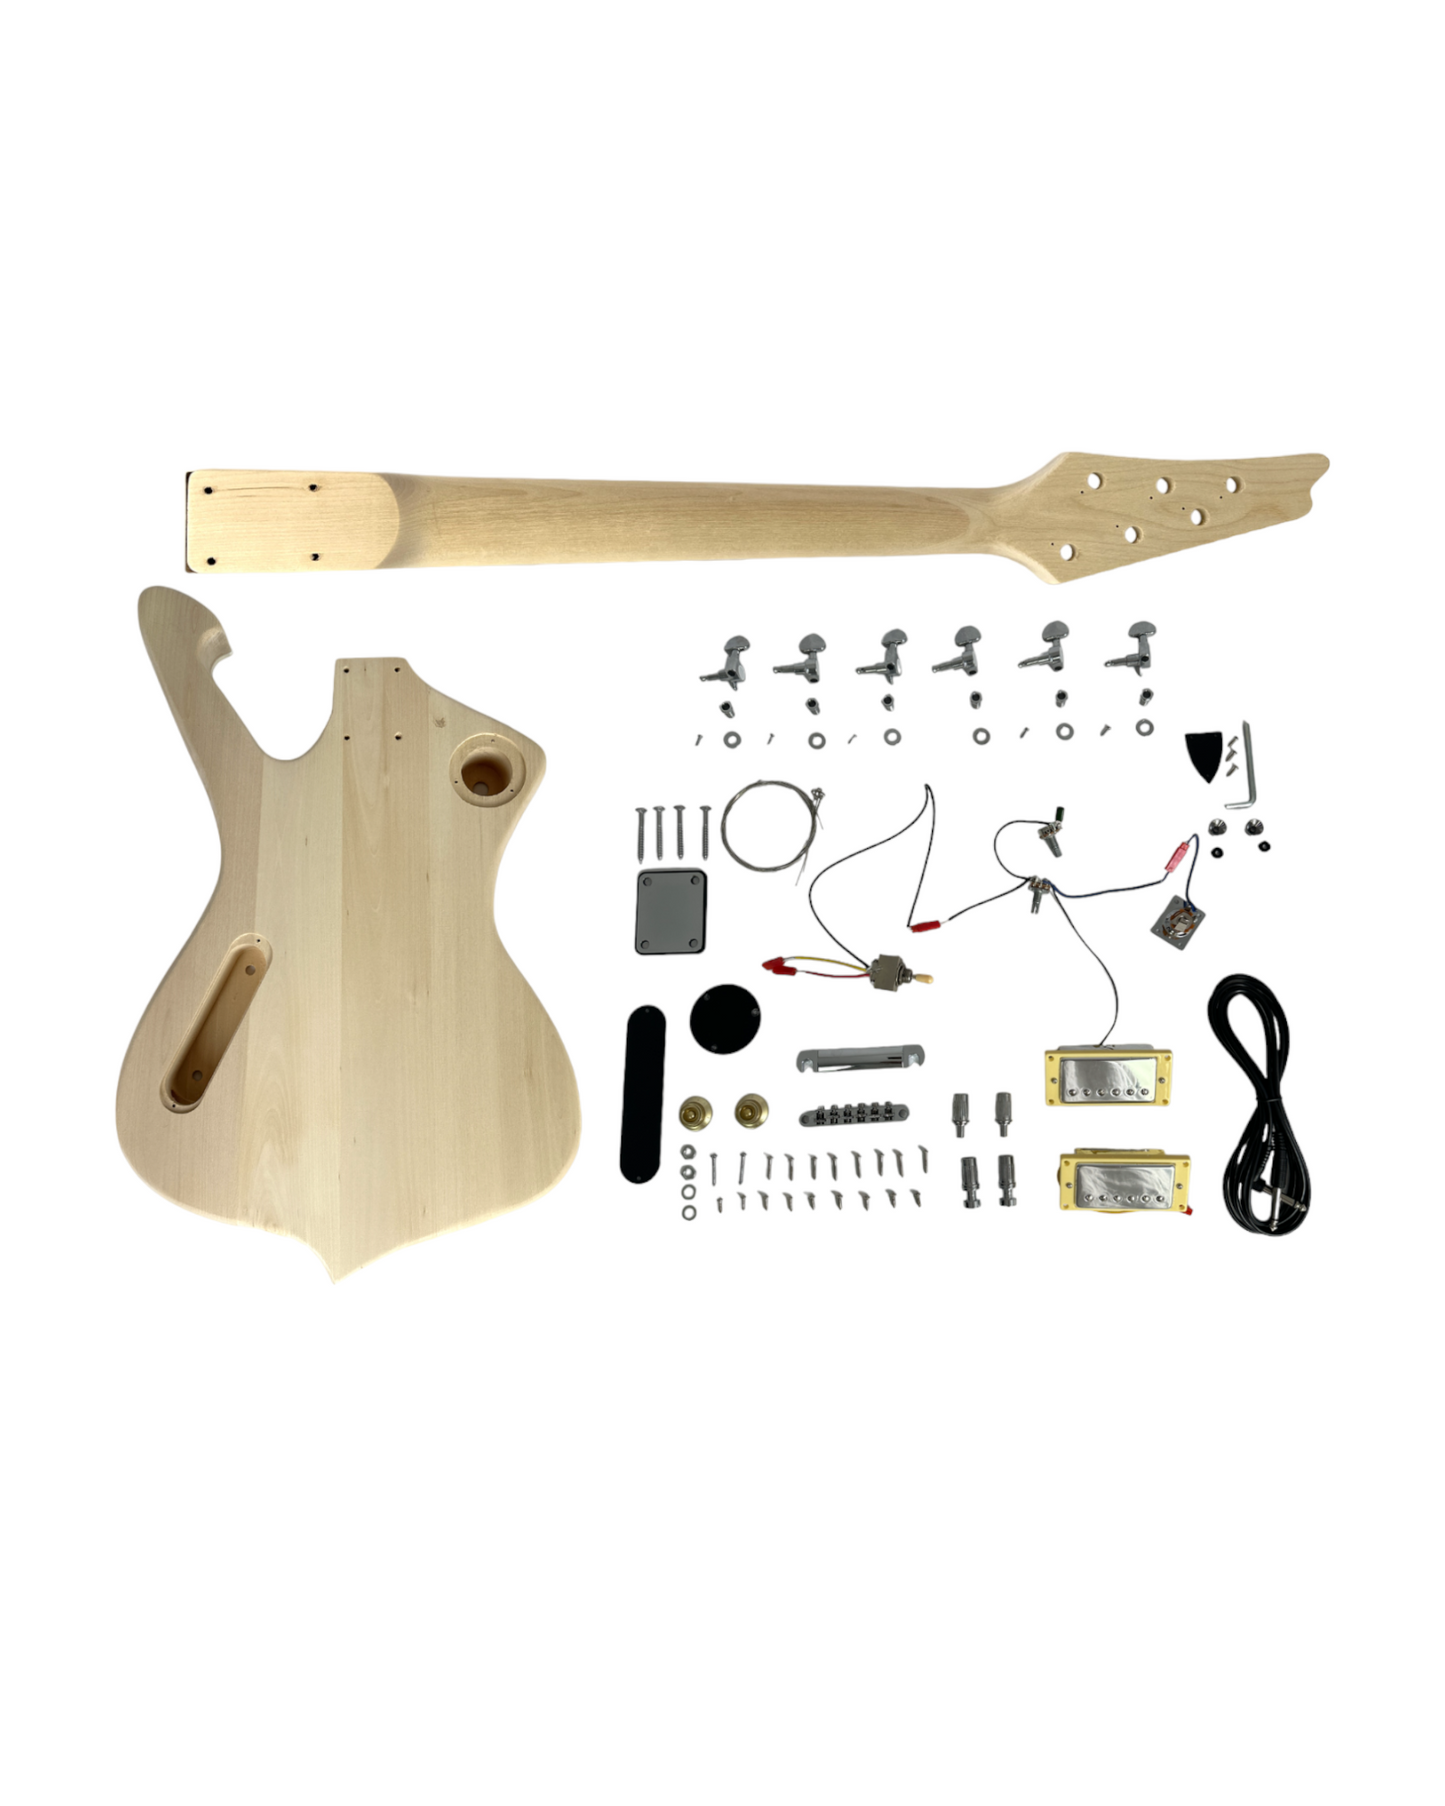 HSIM1910 Solid Basswood Body/Maple Neck Electric Guitar DIY Kit, No-Soldering, HH Pickups